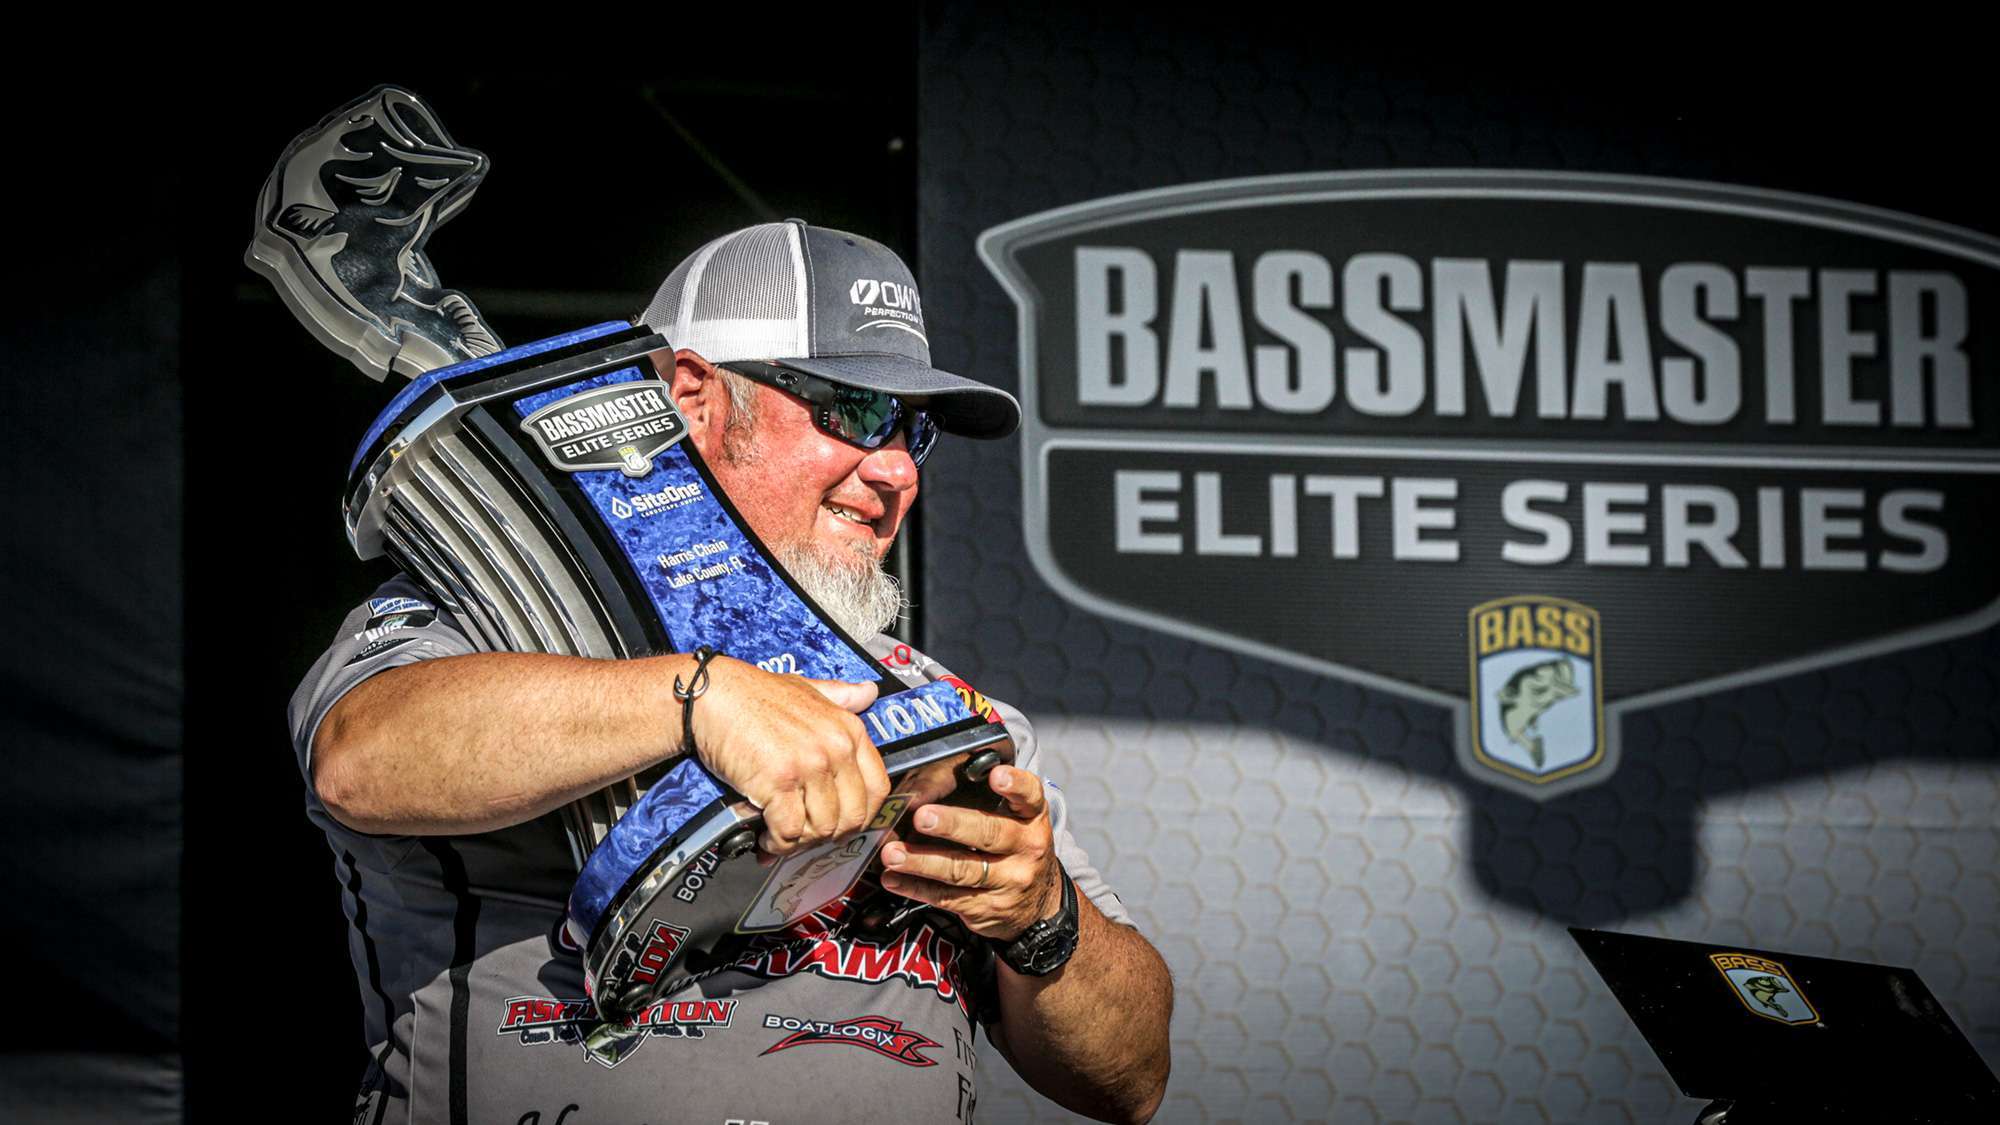 With 22-6, Gross weighed the biggest bag on Championship Sunday for his winning total of 77-11. It was the Chattanooga, Tenn., angler’s second Elite victory. He came from 10th place, 7-8 back of the lead, with a 27-11 bag in the 2020 Eufaula Elite, his second entry on the tour. Gross became the 36th pro to win more than one Elite, proving his steady offshore bite topped the anticipated big sight bites.